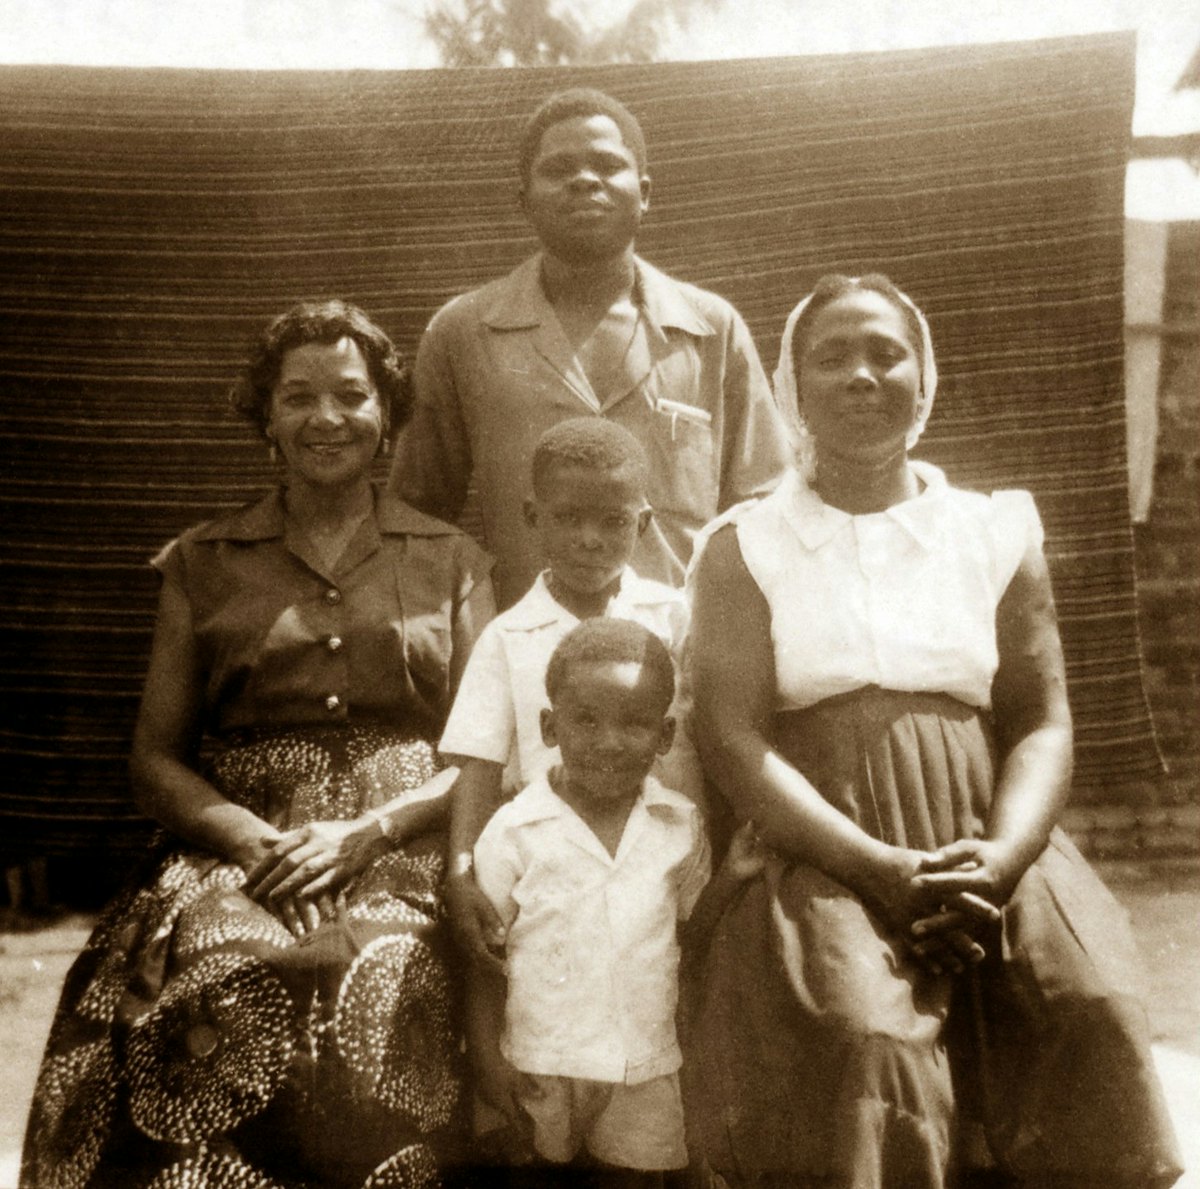 At the Tanyi residence, 1955: Vivian Wesson (left), David Tanyi (standing rear), Esther Tanyi (right), and the Tanyi children, Mbu and Enoch.